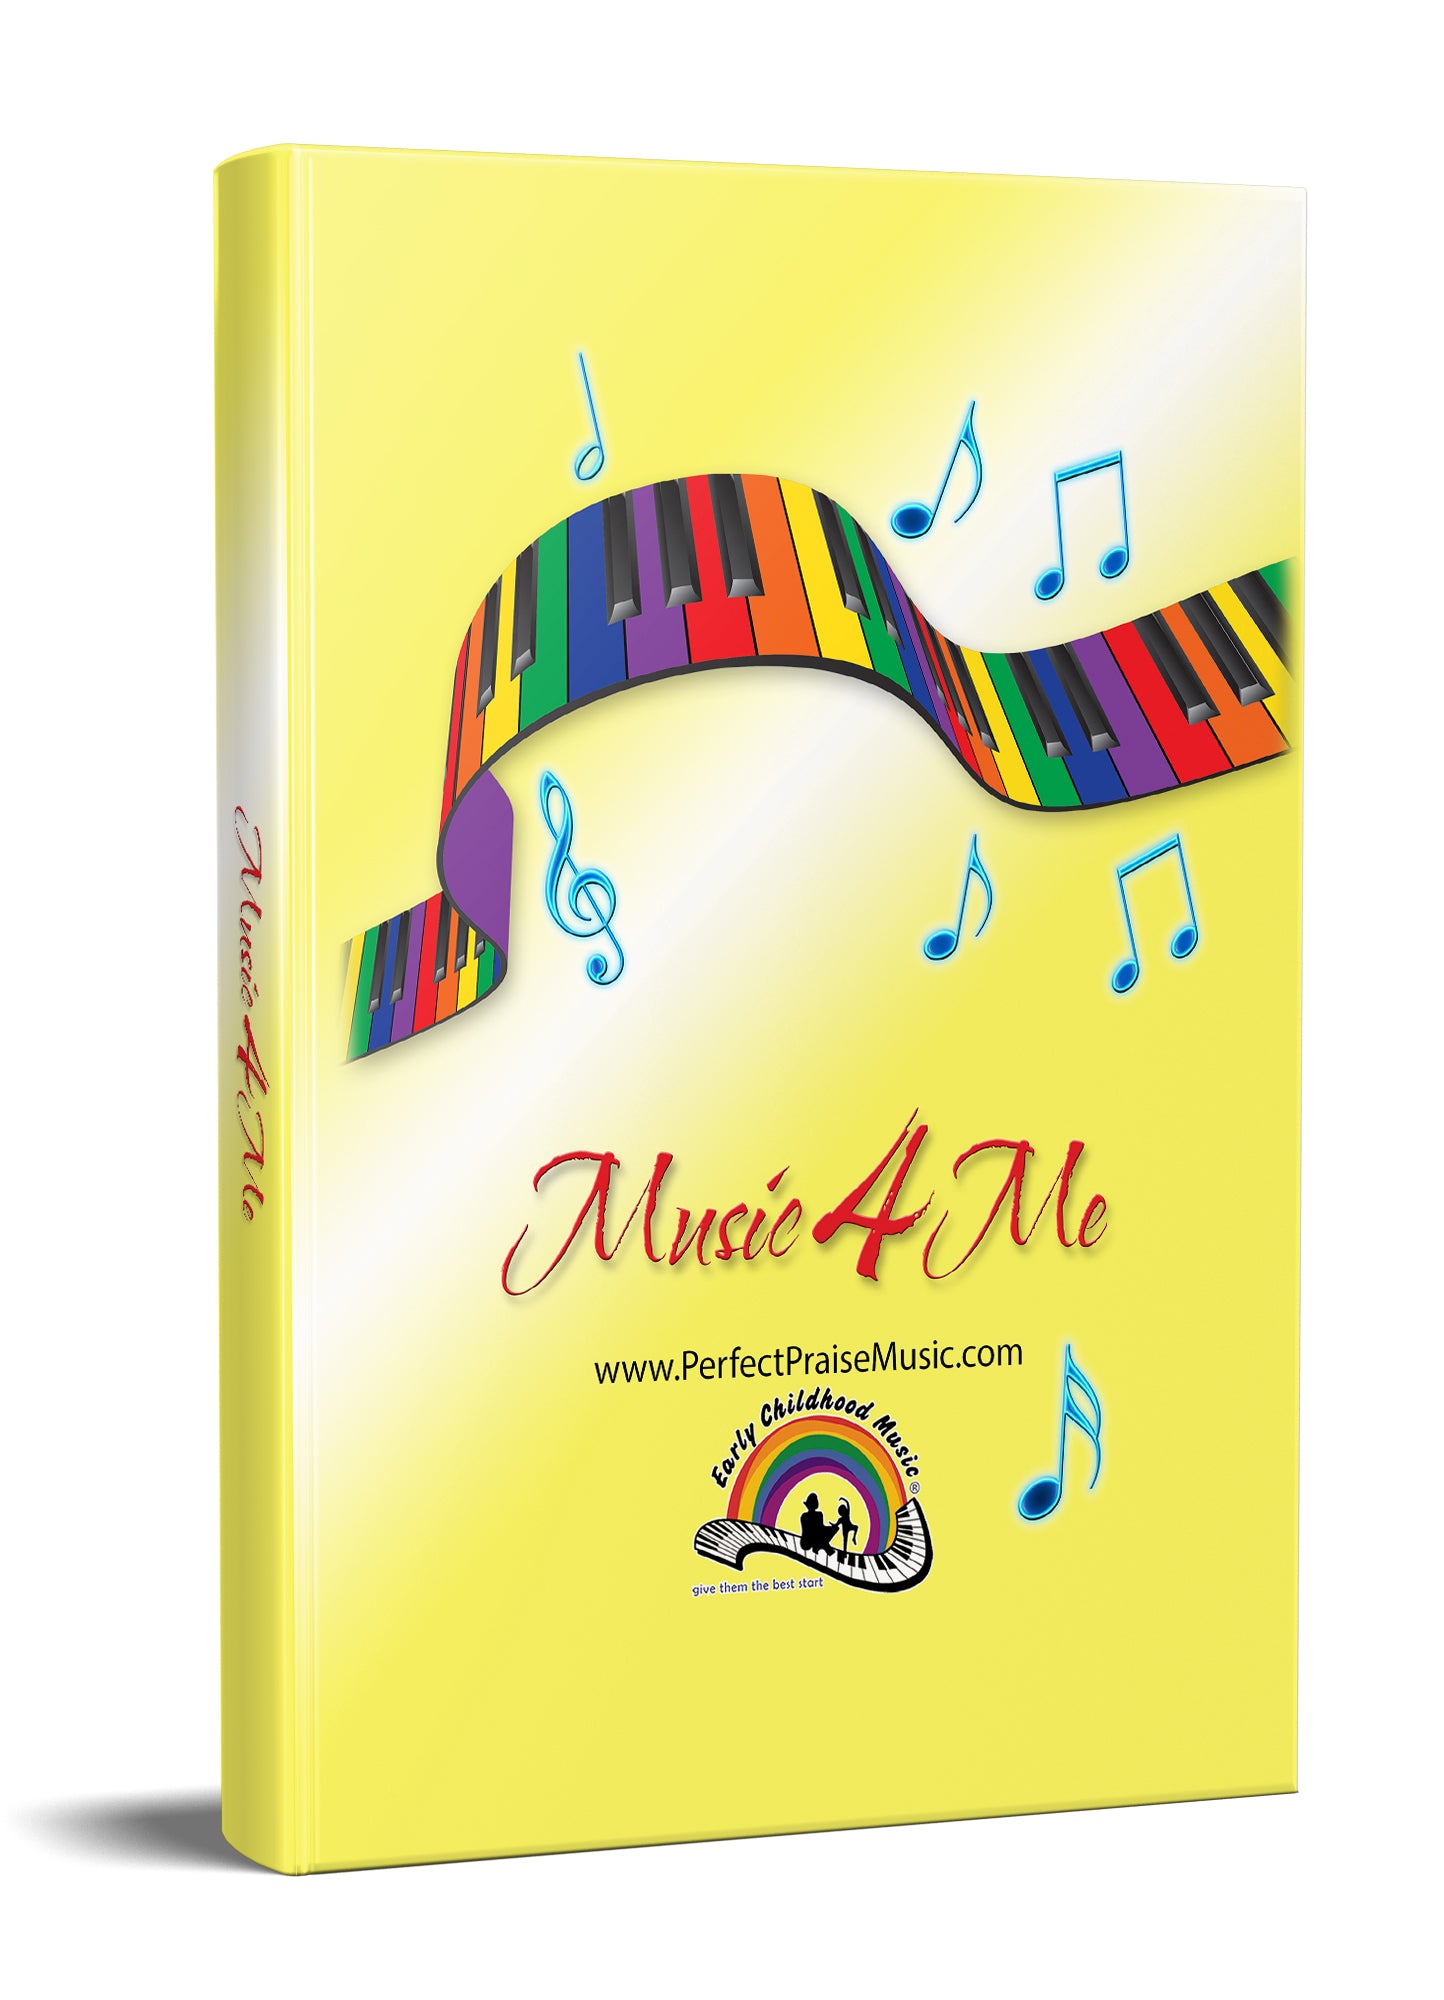 Our Music4Me Book contains the lyrics for the songs in our Music4Me class for children with Autism. It also explains the benefits of different levels of musical participation based on documented music research.  It contains the lyrics for the songs on the Music4Me CD (sold separately).